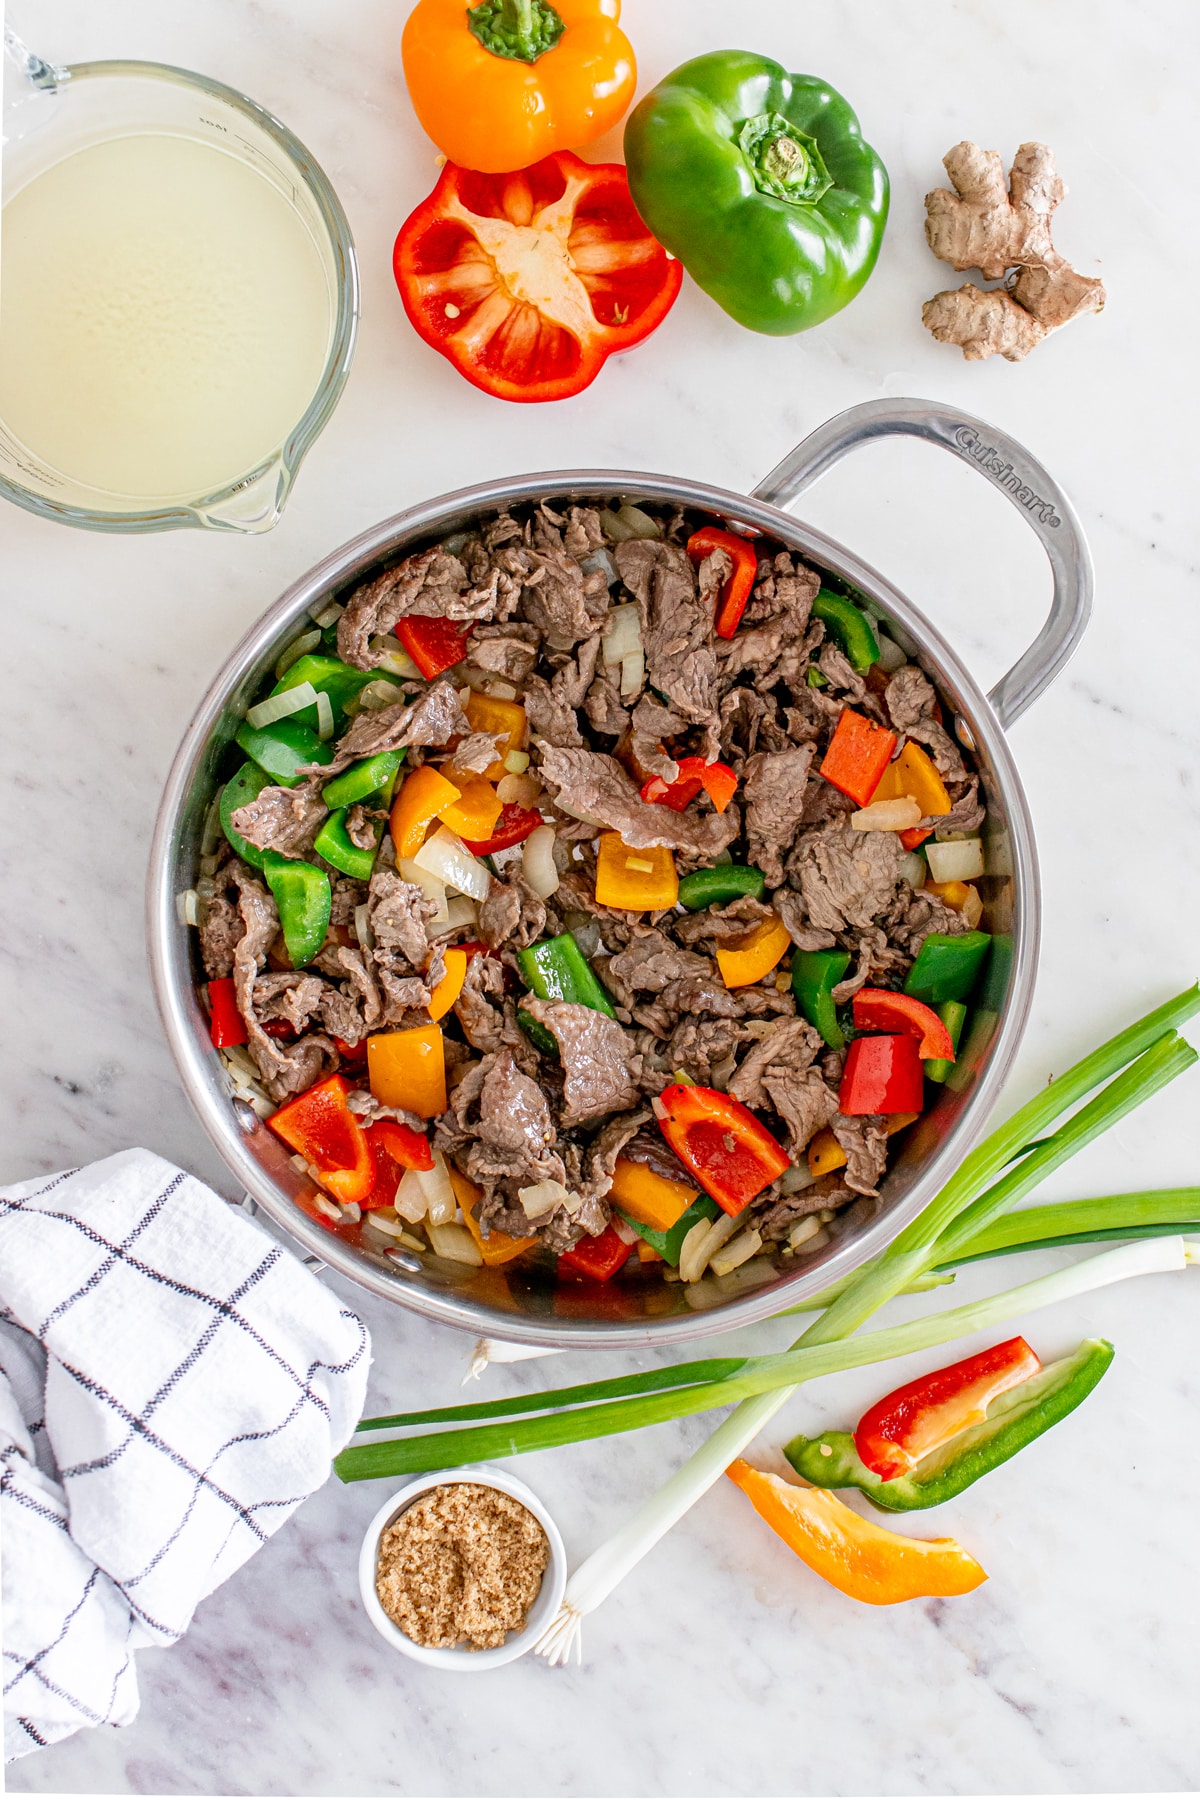 Next process in preparing Chinese Pepper Steak is to stir-fry beef with bell peppers and onions in a pan, surrounded by fresh ingredients and a glass of corn starch.